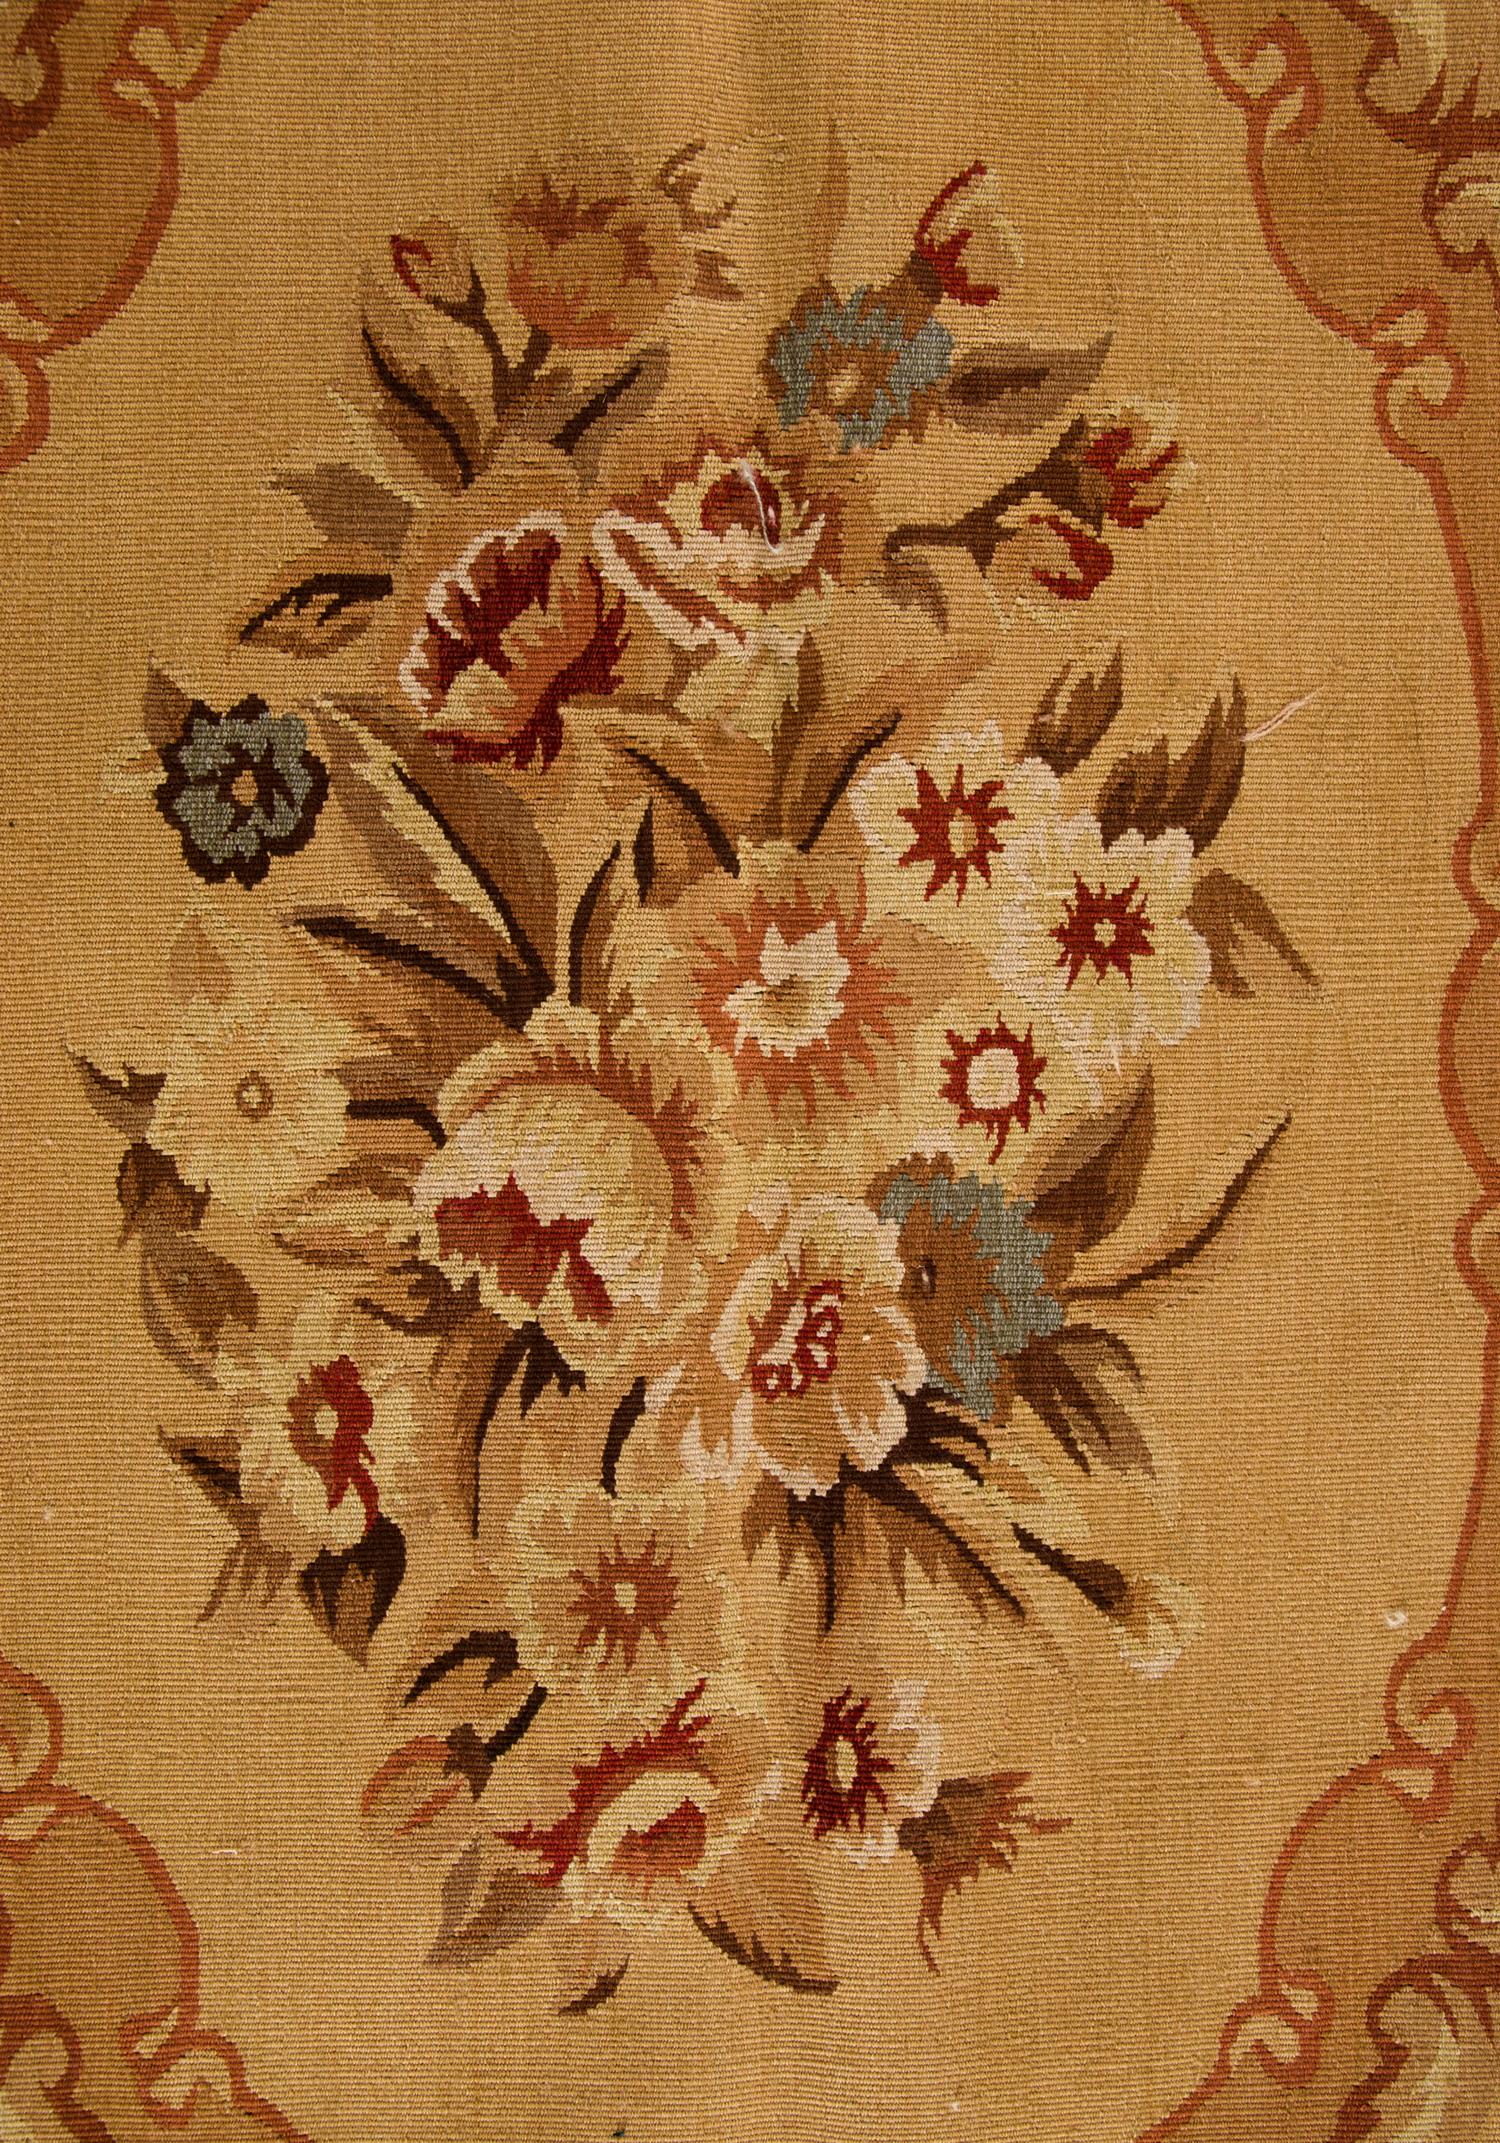 This luxurious gold beige area rug is a very high-quality item, getting lots of attention in the rug store because of the elegant color and design. These handmade elegant Chinese Aubusson floor rugs have soft, subtle shades with gorgeous floral